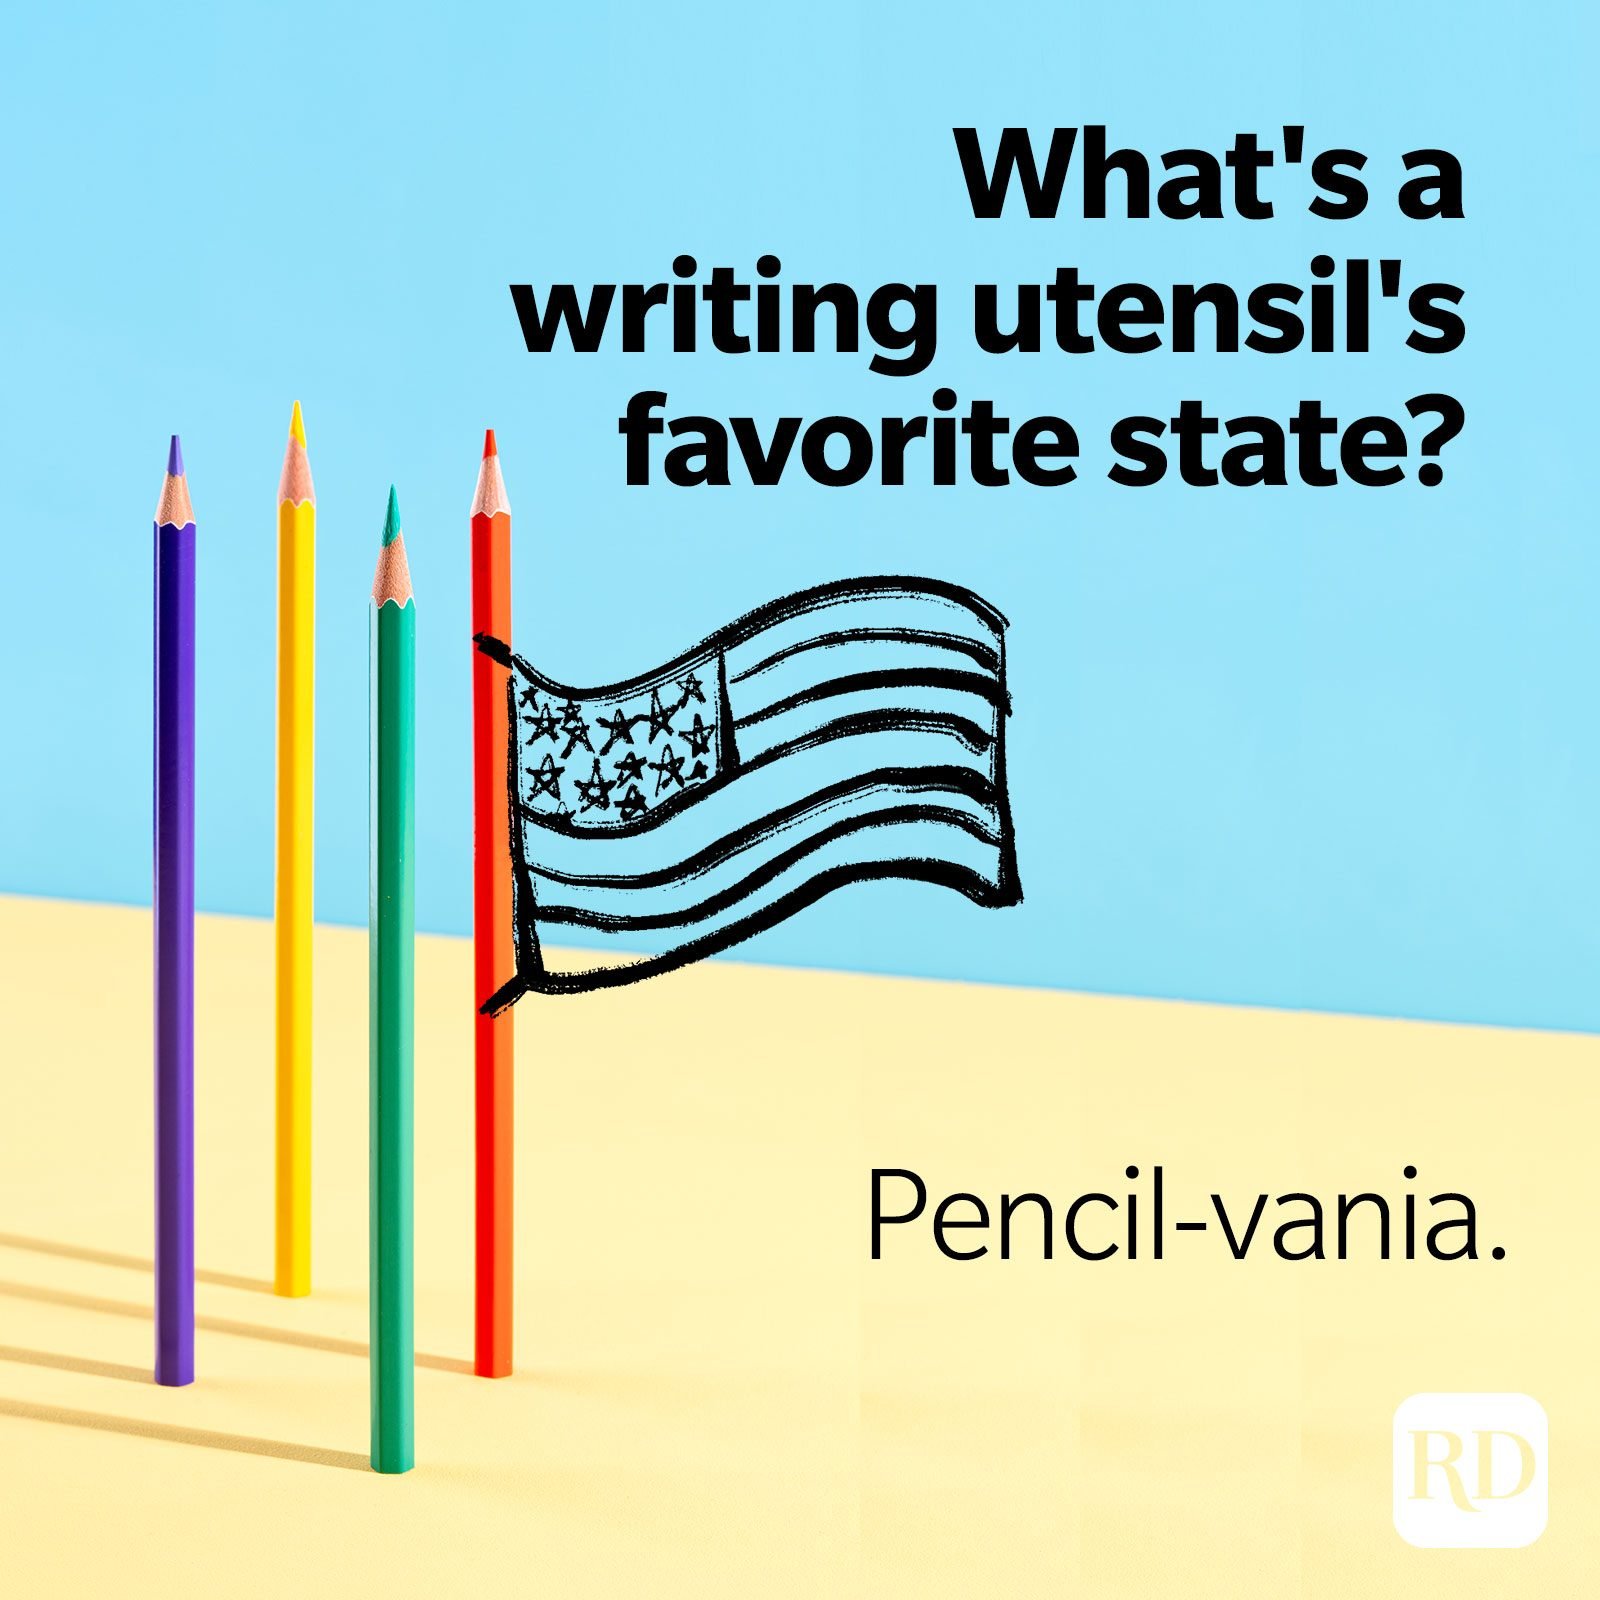 23. What's a writing utensil's favorite state? Pencil-vania.